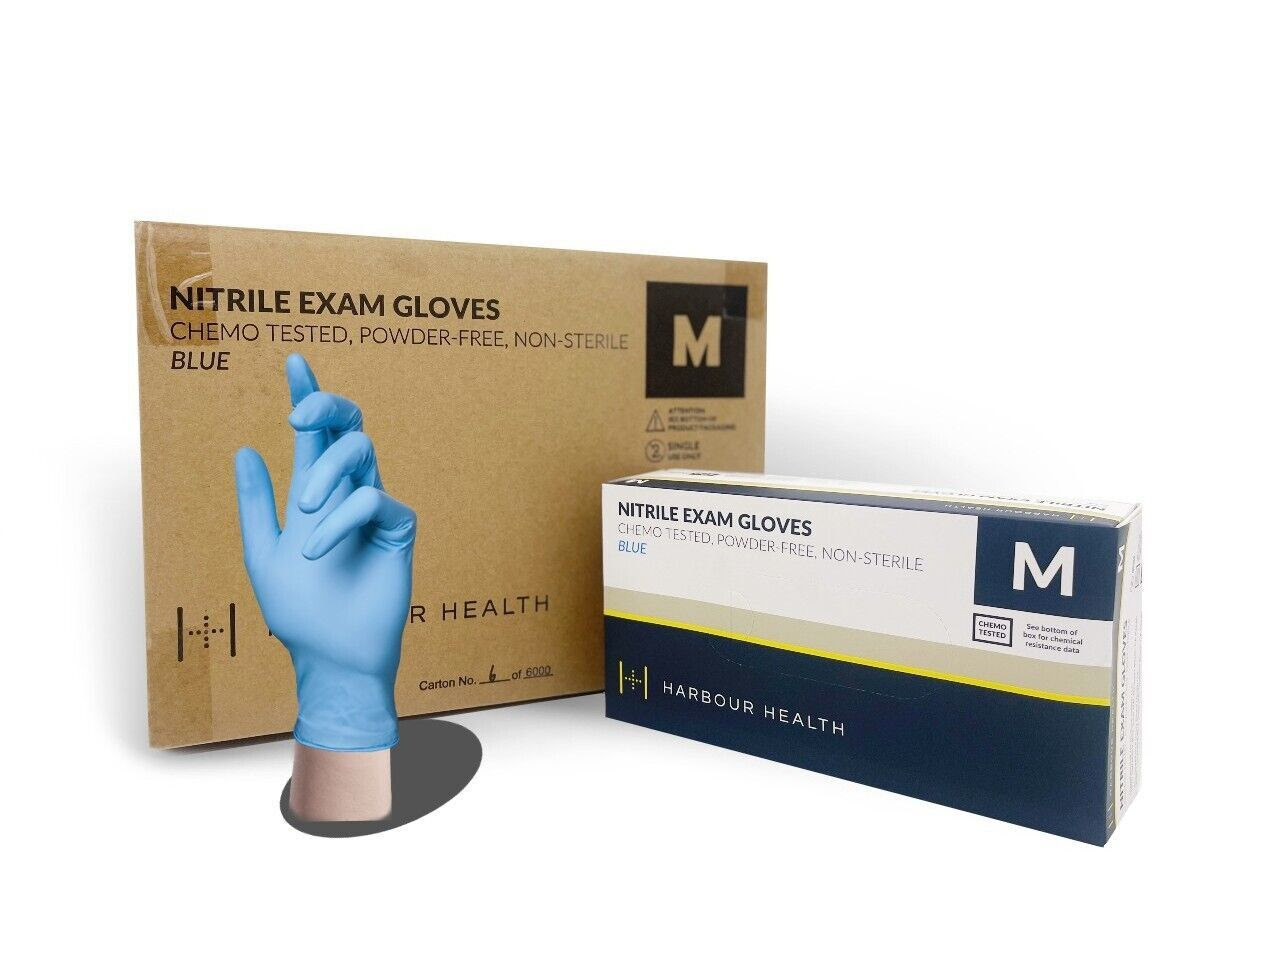 Harbour Health Chemotherapy Rated 5 MIL Nitrile Exam Gloves. 80000Boxes. EXW Los Angeles /box of 100 Gloves. (M & L only)